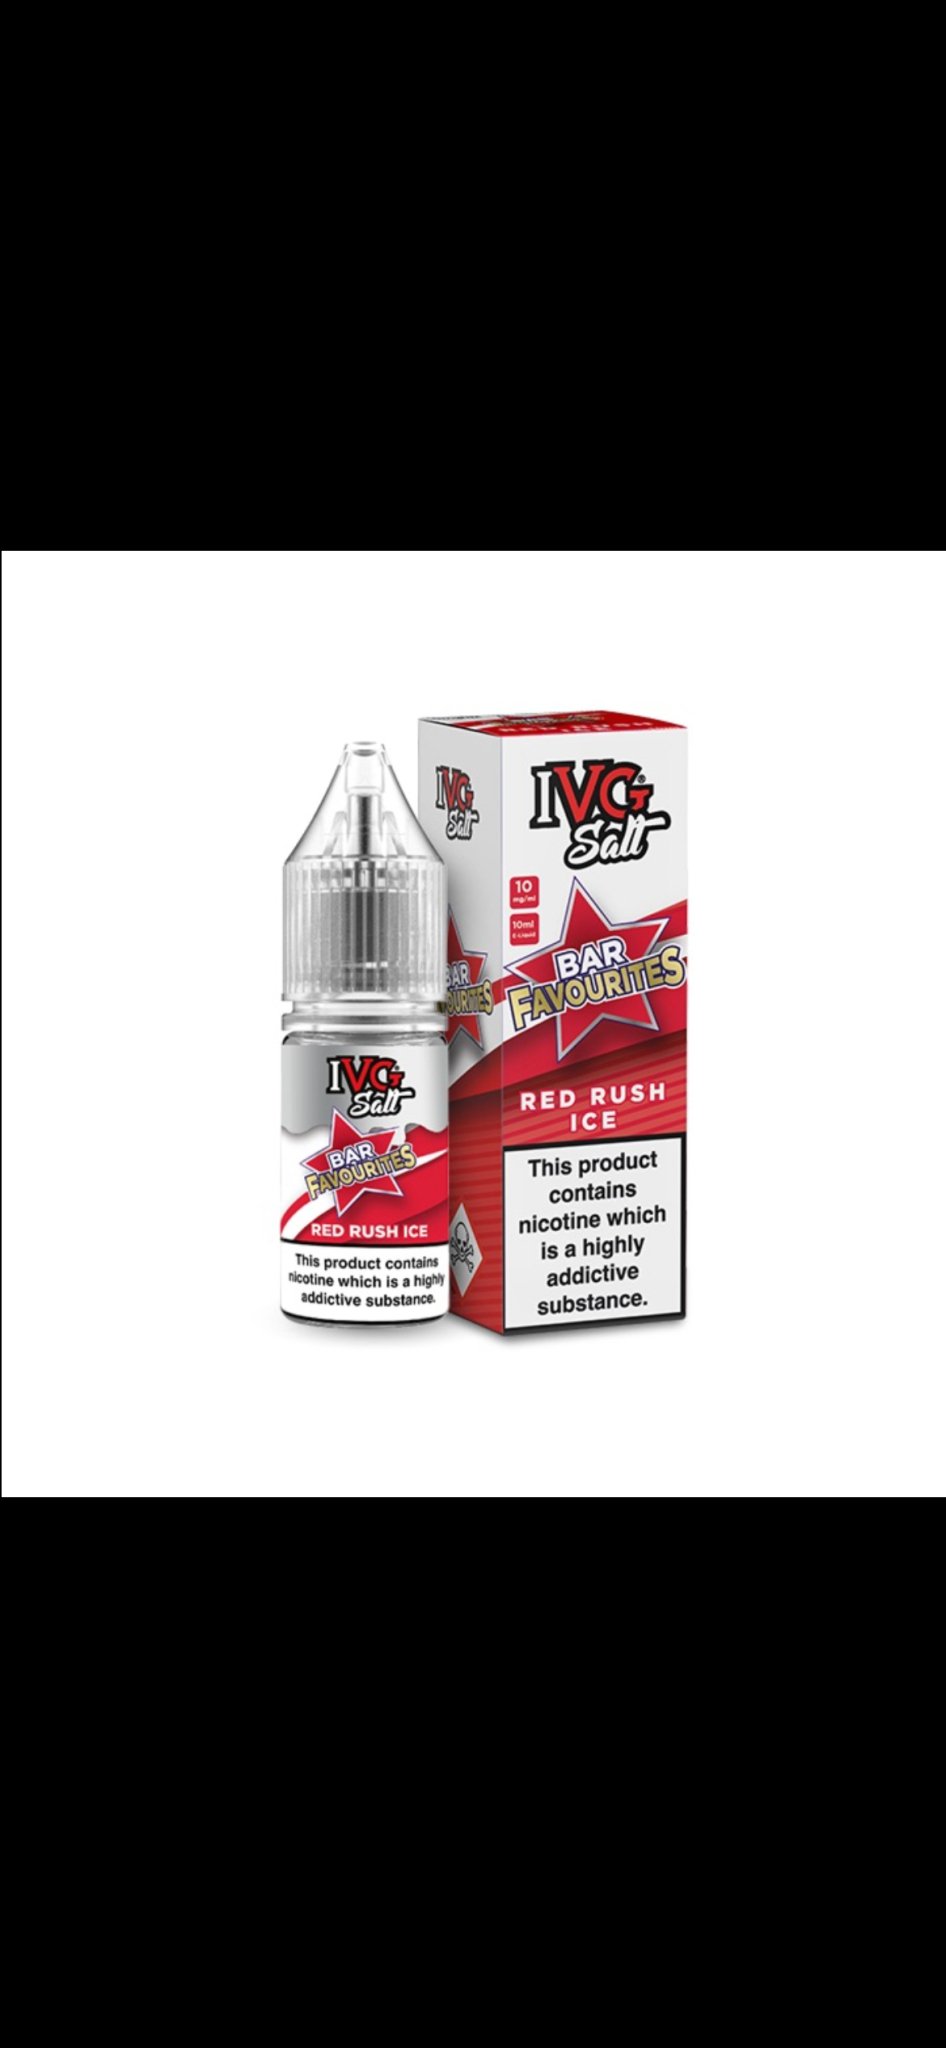 IVG Bar Favourites Red Rush Ice 20mg - EUK